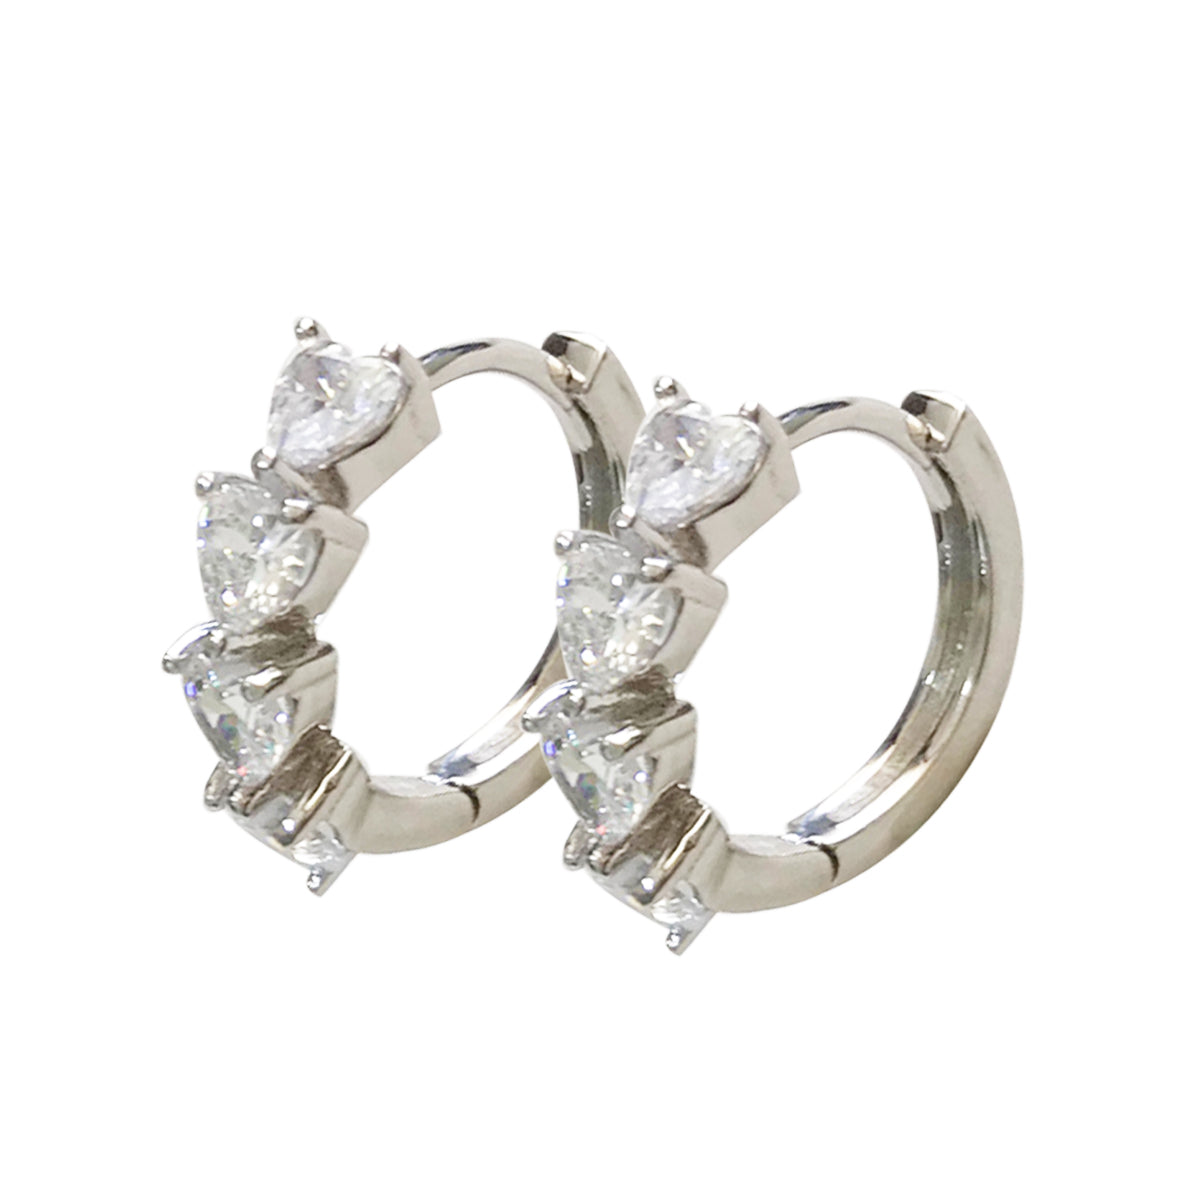 HEART SHAPED HOOPS FOR HER IN 925 STERLING SILVER